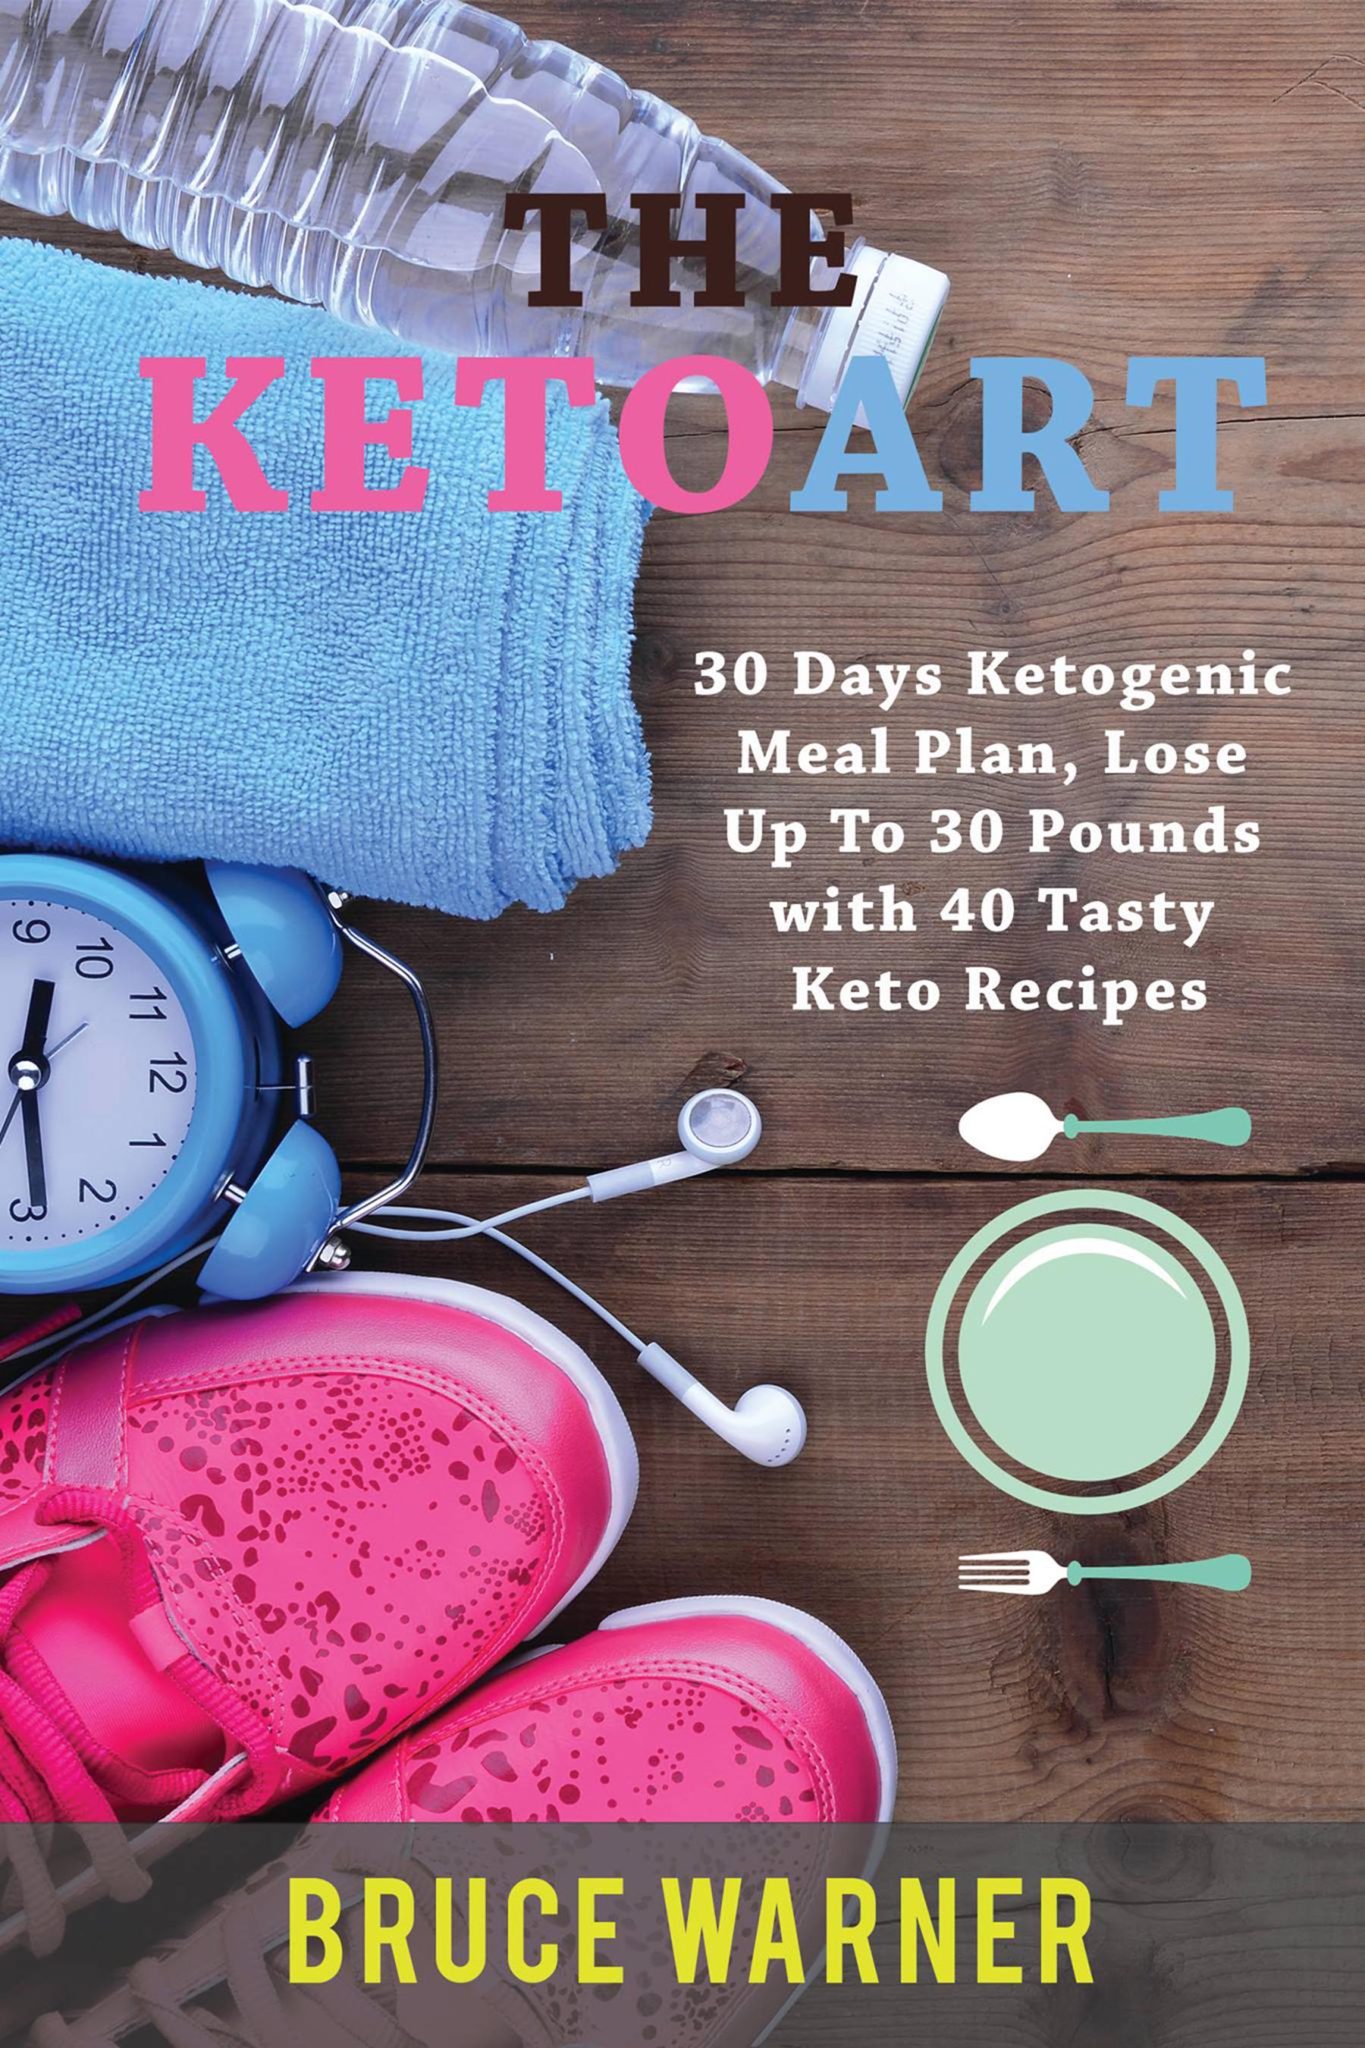 FREE: The KetoArt: 30 Days Ketogenic Meal Plan: Lose Up To 30 Pounds with 40 Tasty Keto Recipes by Bruce Warner